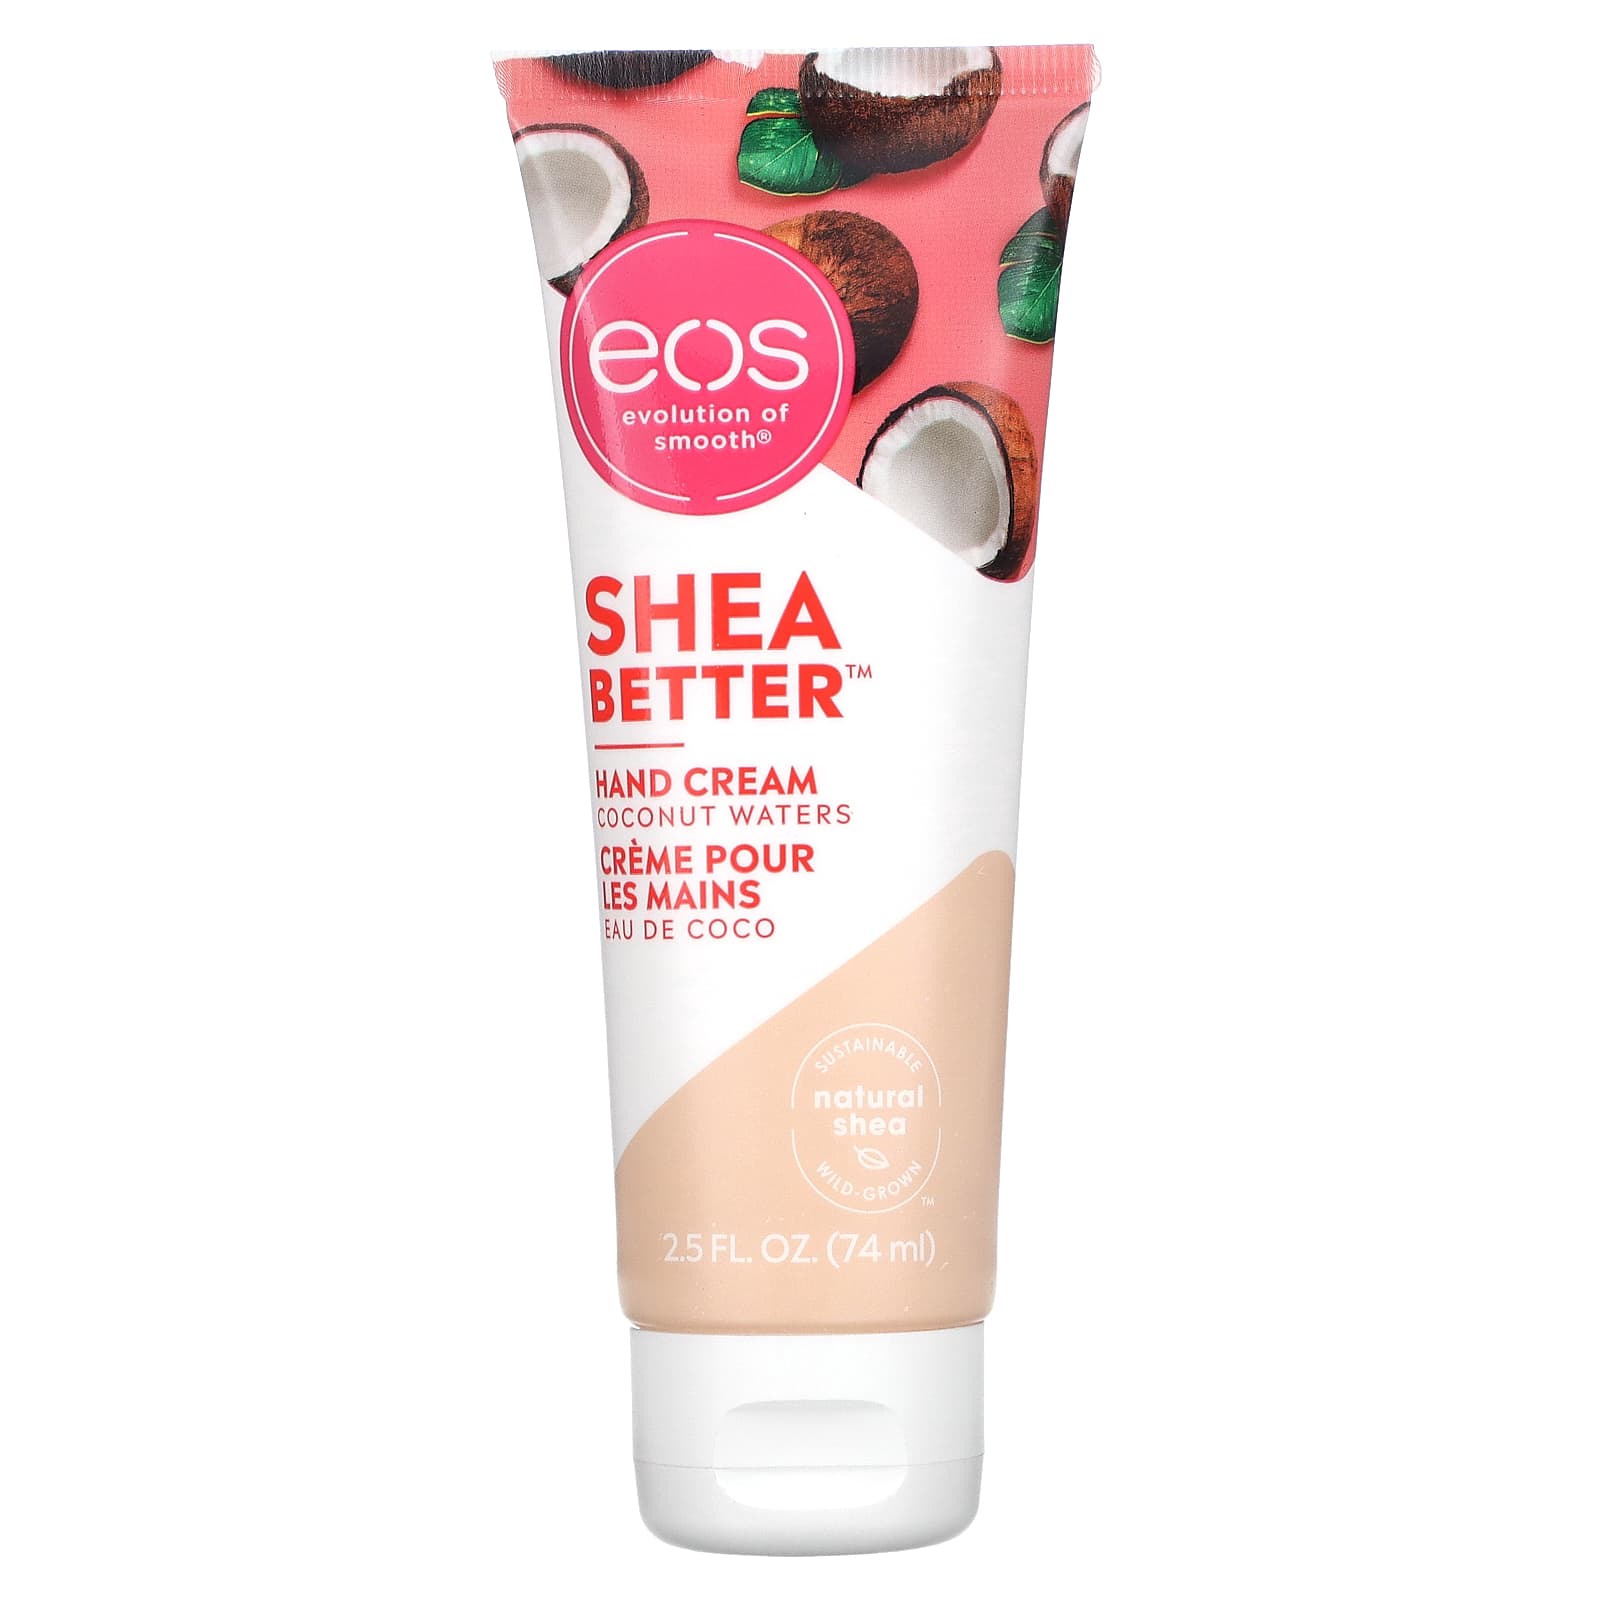 Evolution of Smooth, Better, Hand Cream, Coconut Waters, 2.5 (74 ml)